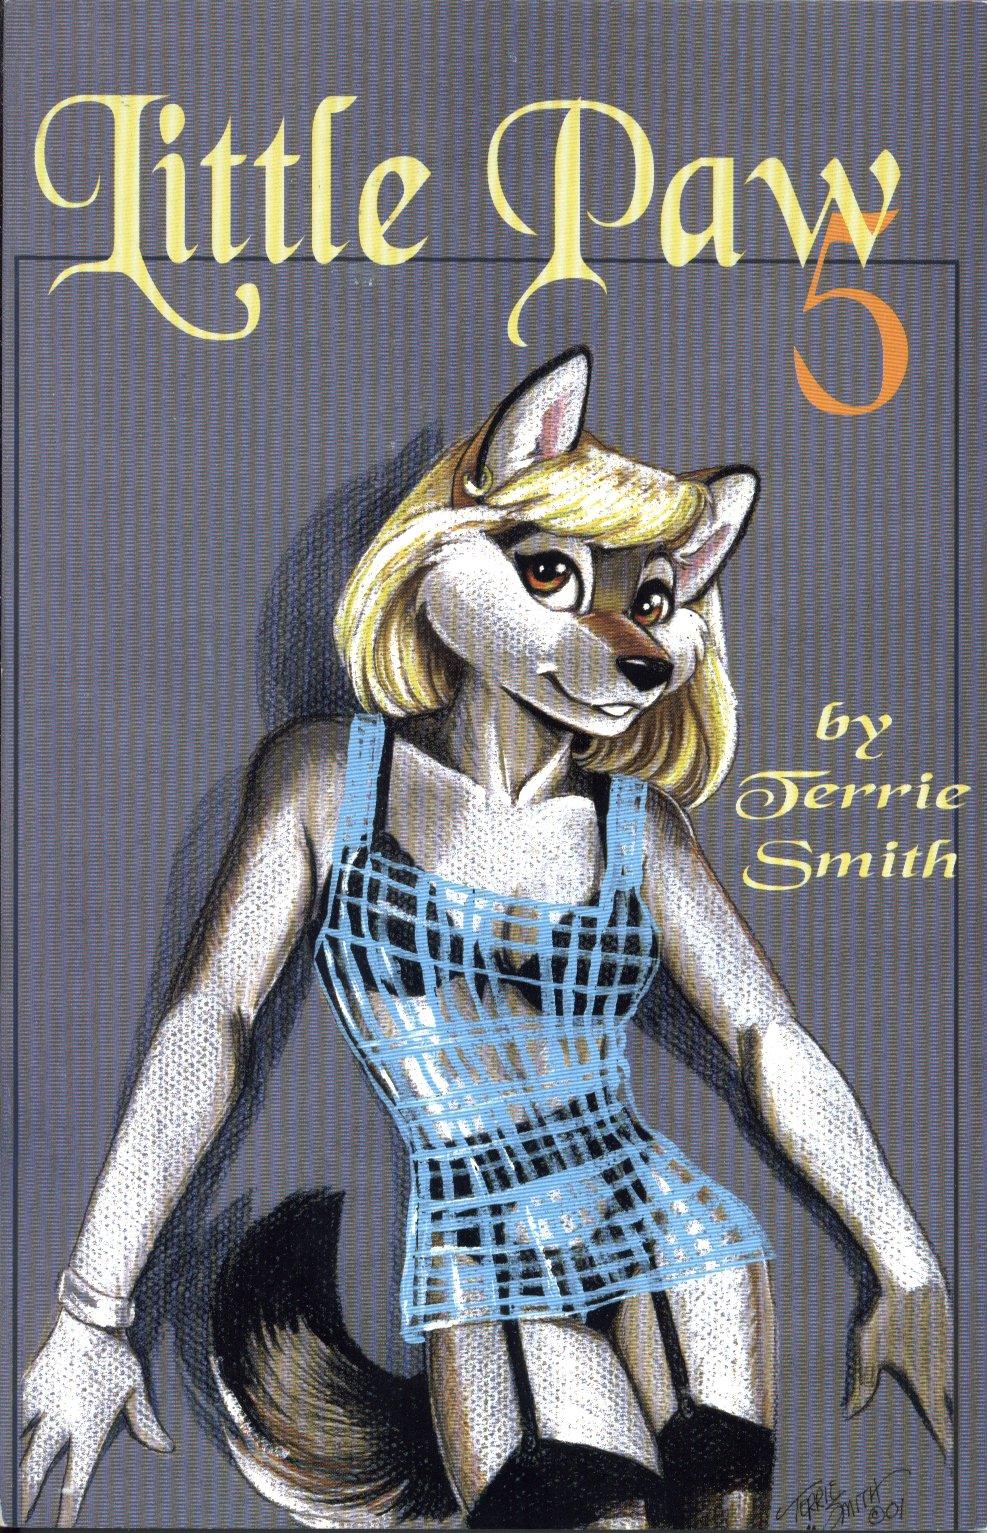 [Terrie Smith] Little Paw #5 